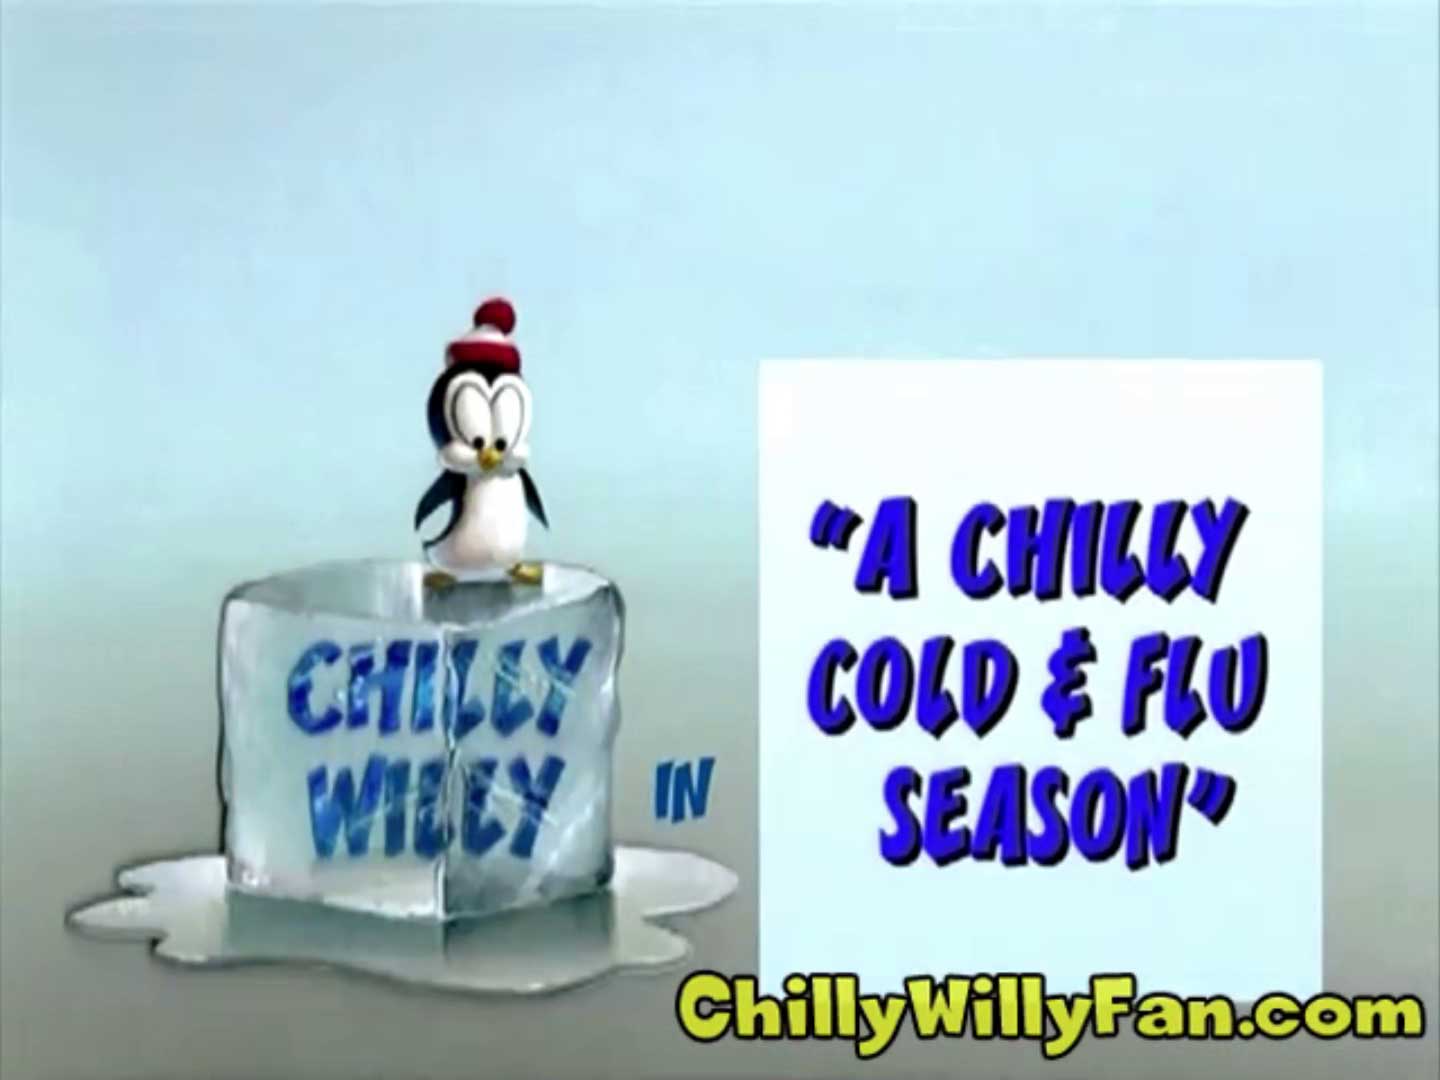 Chilly Willy - A Chilly Cold & Flu Season